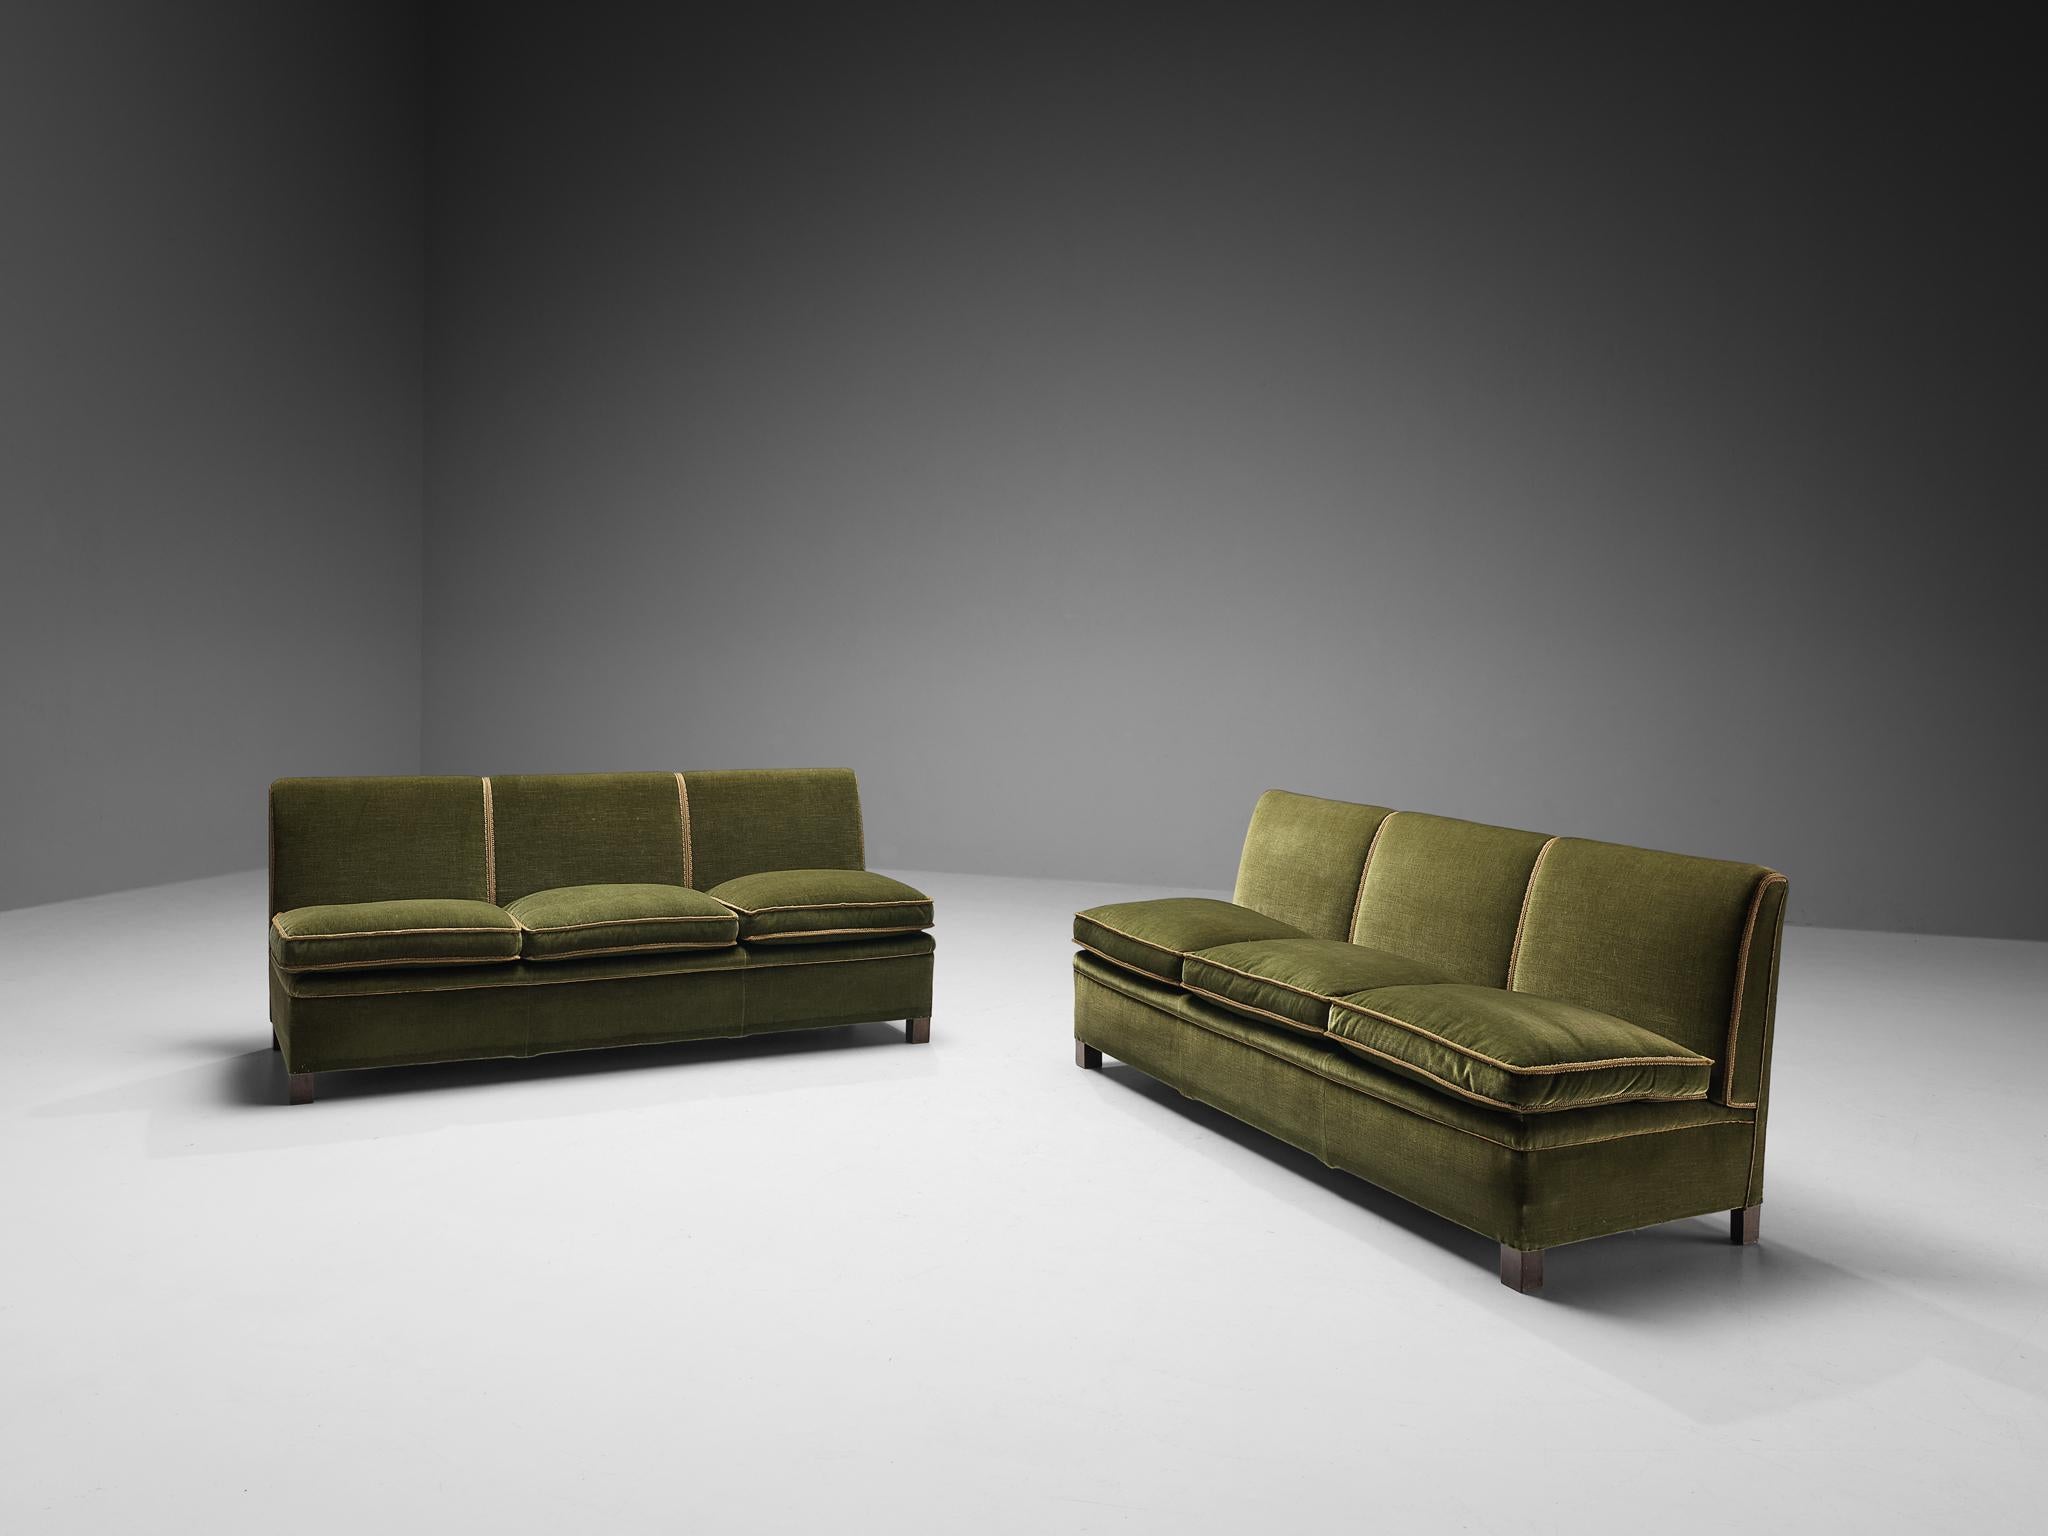 Georg Kofoed for Møbeletabl, pair of sofas, velvet, stained beech, Denmark, circa. 1950. 

This rare pair of sofa is designed by Georg Kofoed has a cozy appeal and is characterized by a splendid construction consisting of two regular three-seat